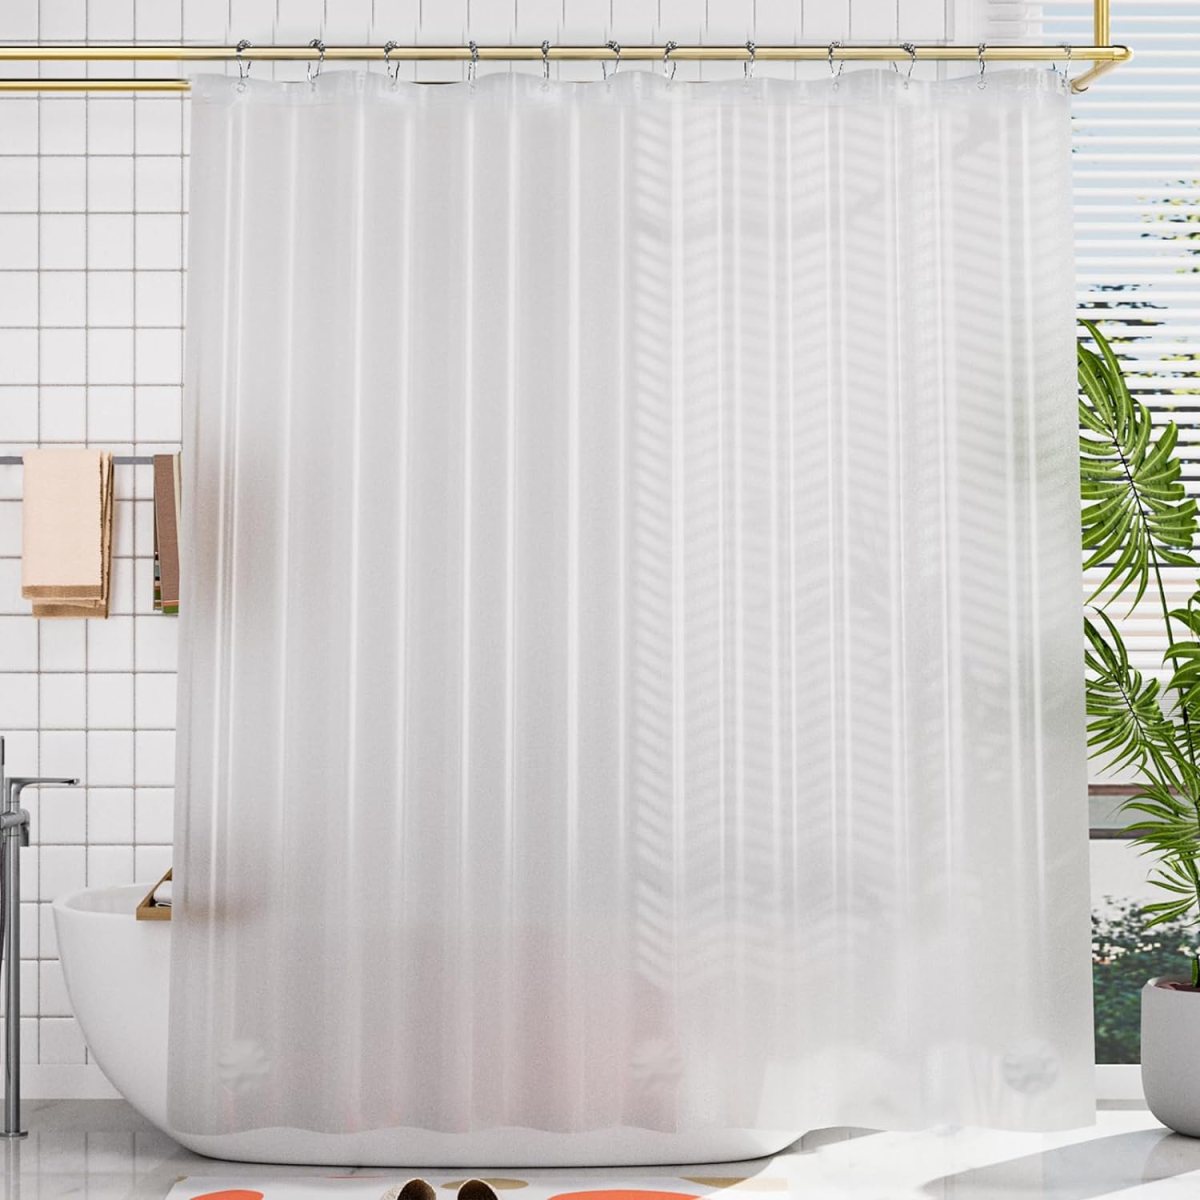 Things You Need for an Apartment Option Frosted Shower Curtain